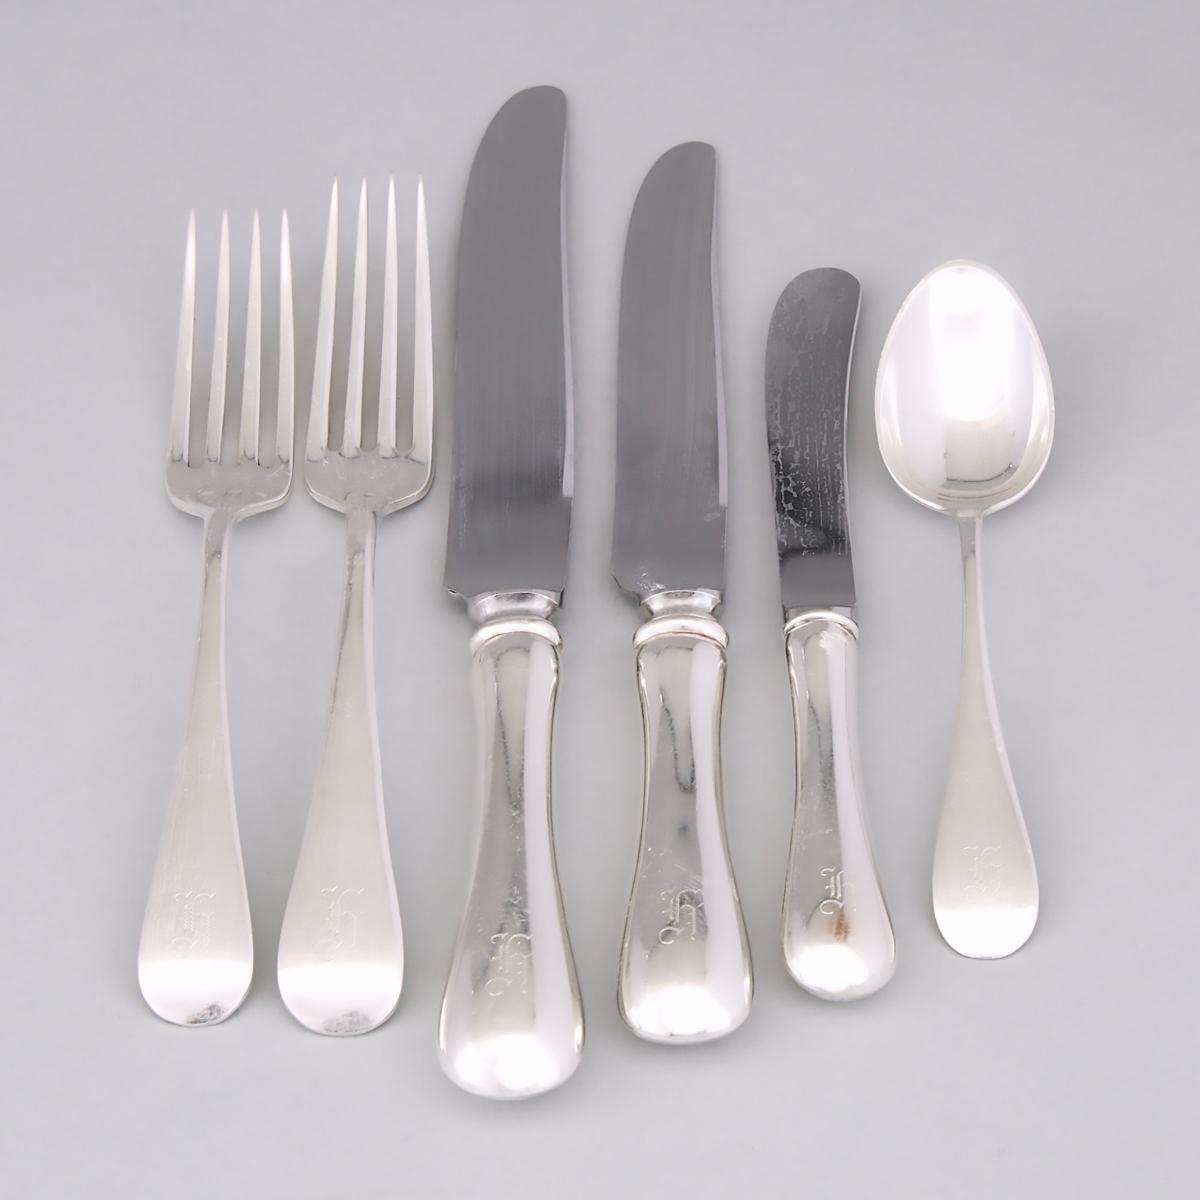 Canadian Silver ‘Old English’ Pattern Flatware Service, Roden Bros., Toronto, Ont., 20th century (48